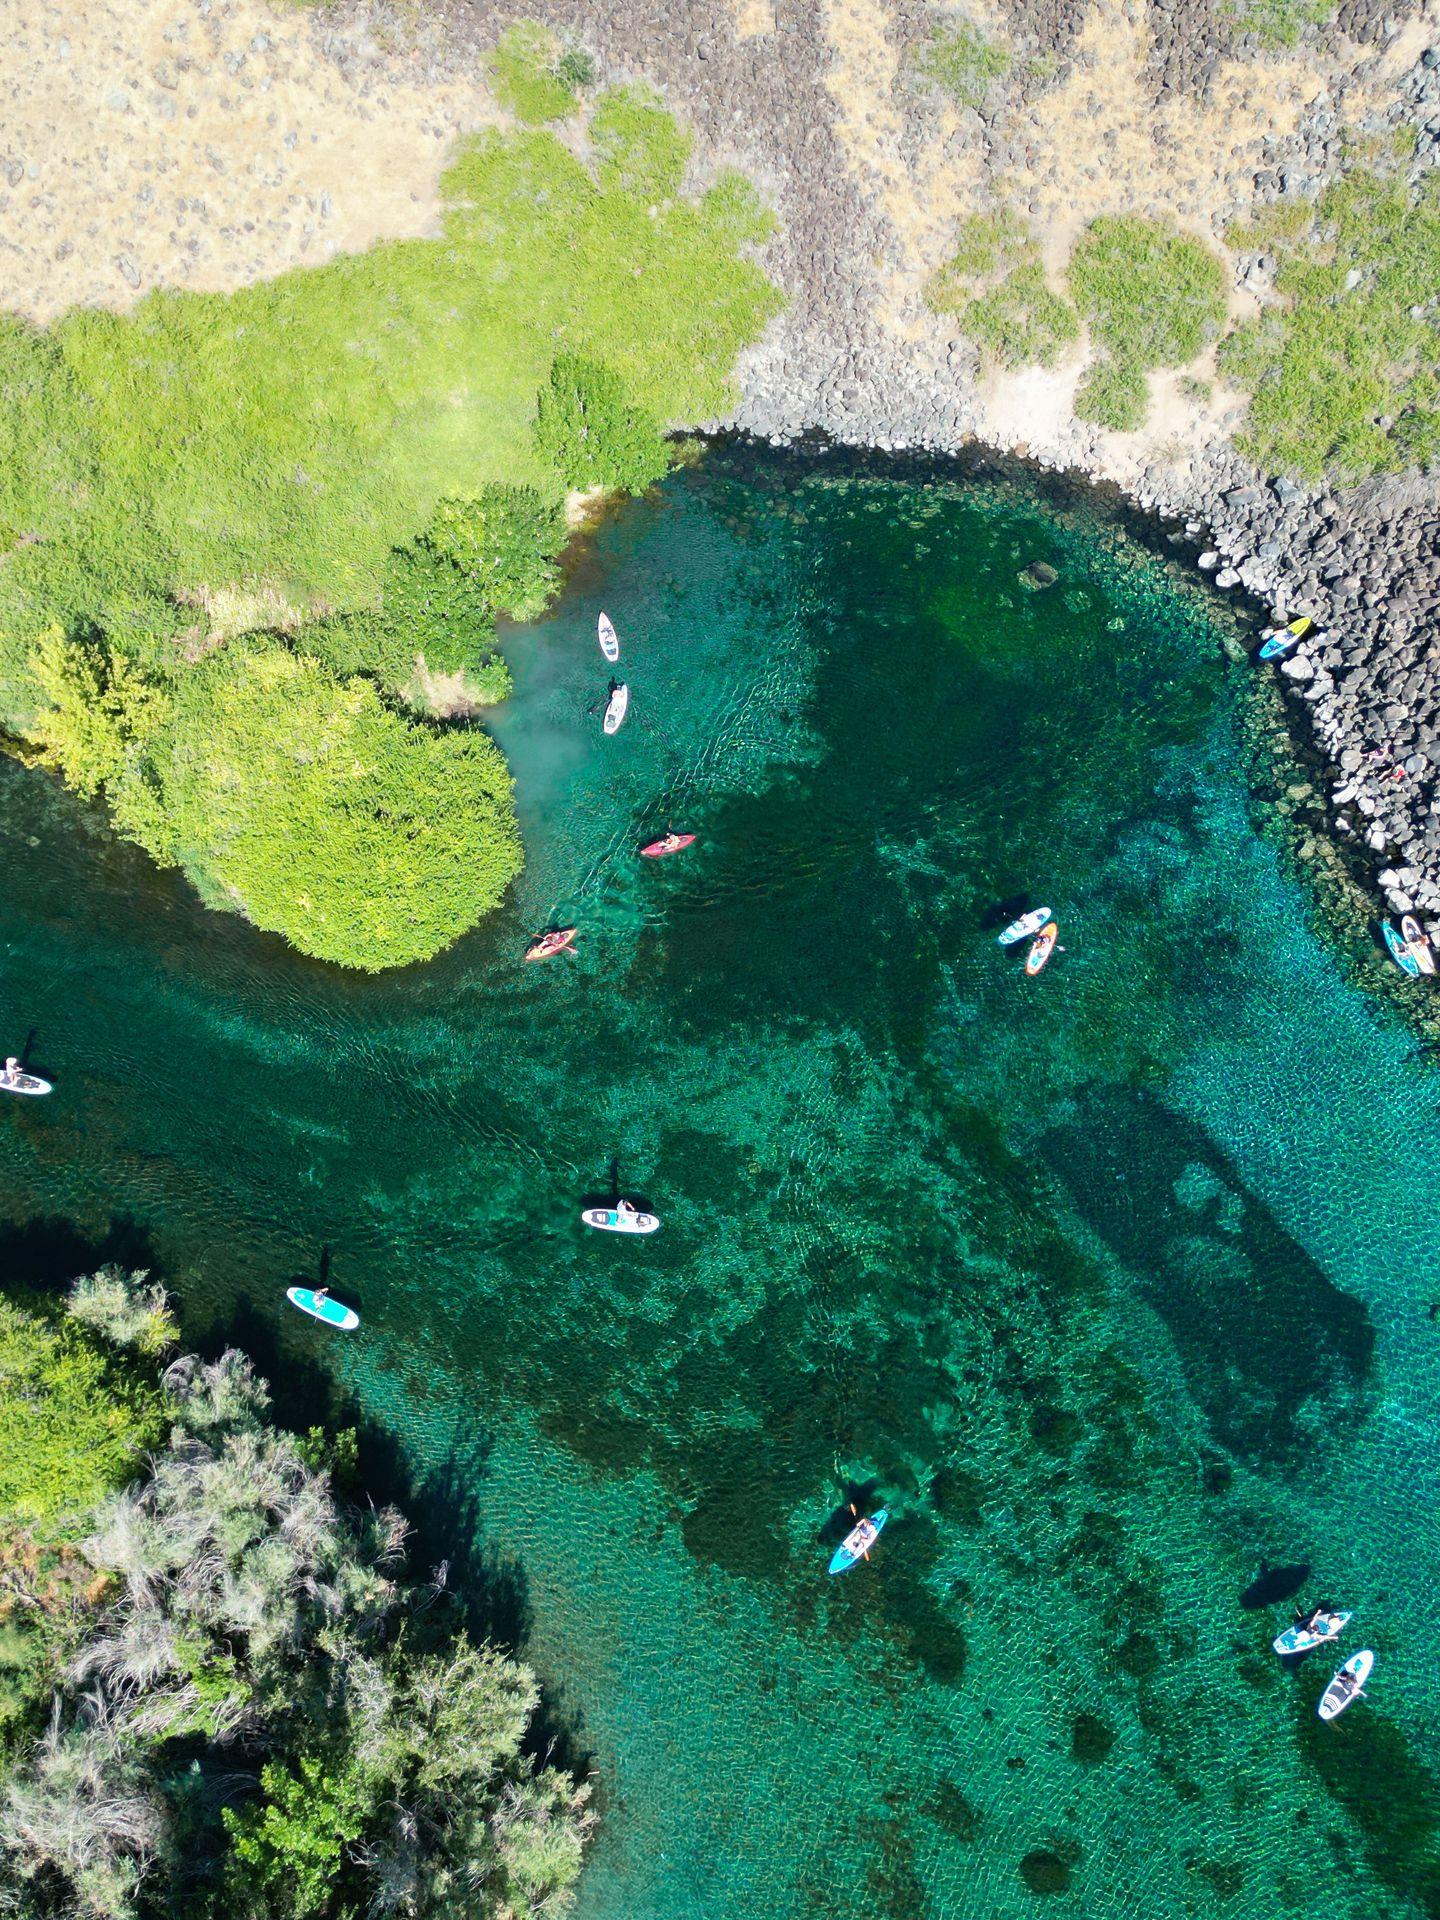 A drone shot of the heart-shaped Blue Heart Springs with several kayaks and paddle boards in the water.